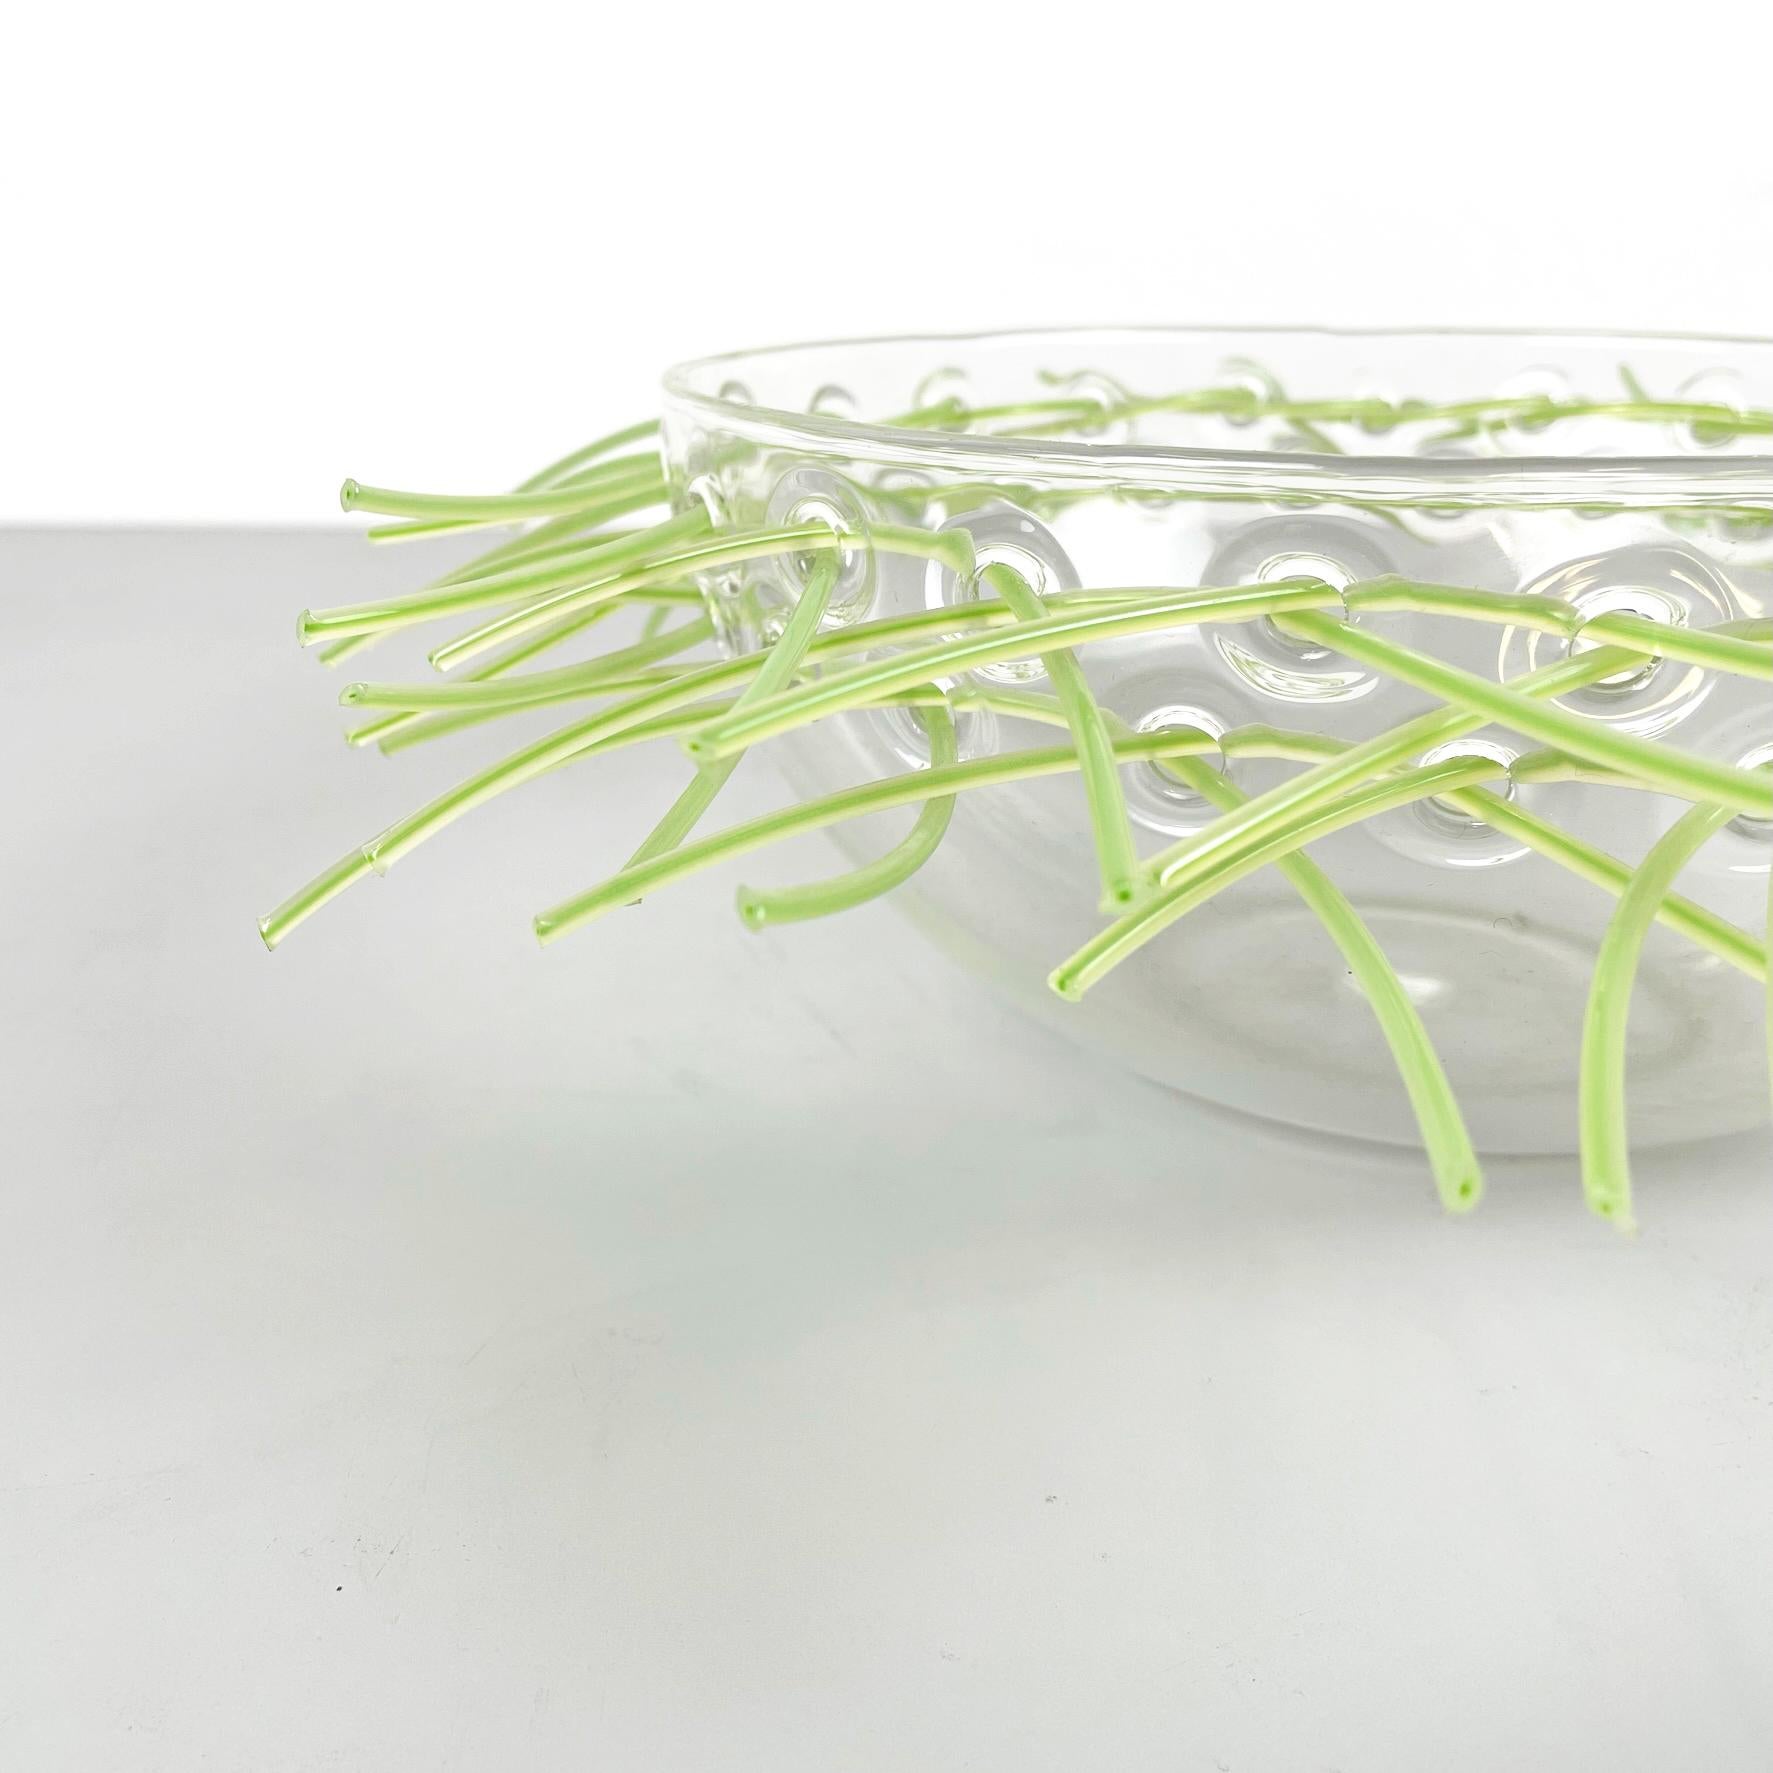 Contemporary Italian Postmodern Glass Green Plastic Pocket Emptier Bowl by Cleto Munari, 2000 For Sale